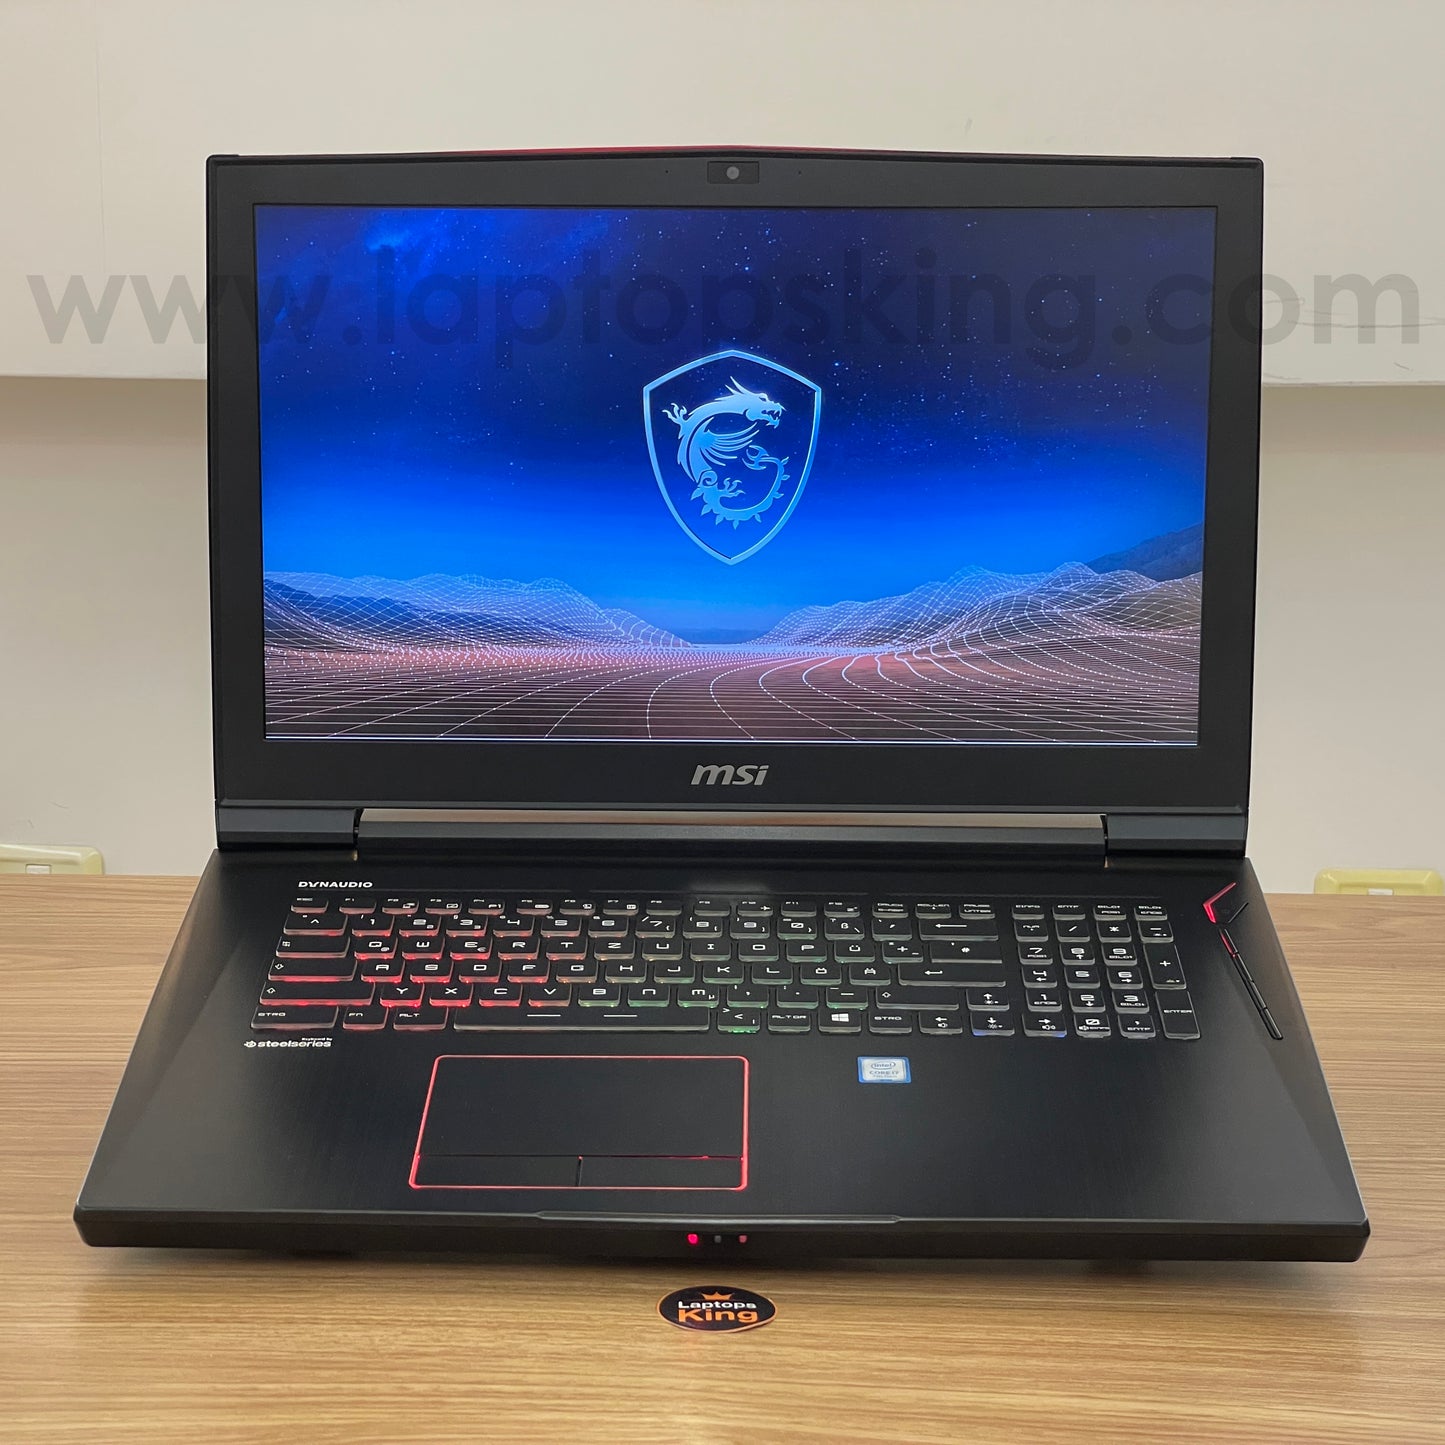 Msi Titan GT73EVR 7RE Steelseries Core i7-7700hq Gtx 1070 120hz 17.3" Gaming Laptop (Used Very Clean)